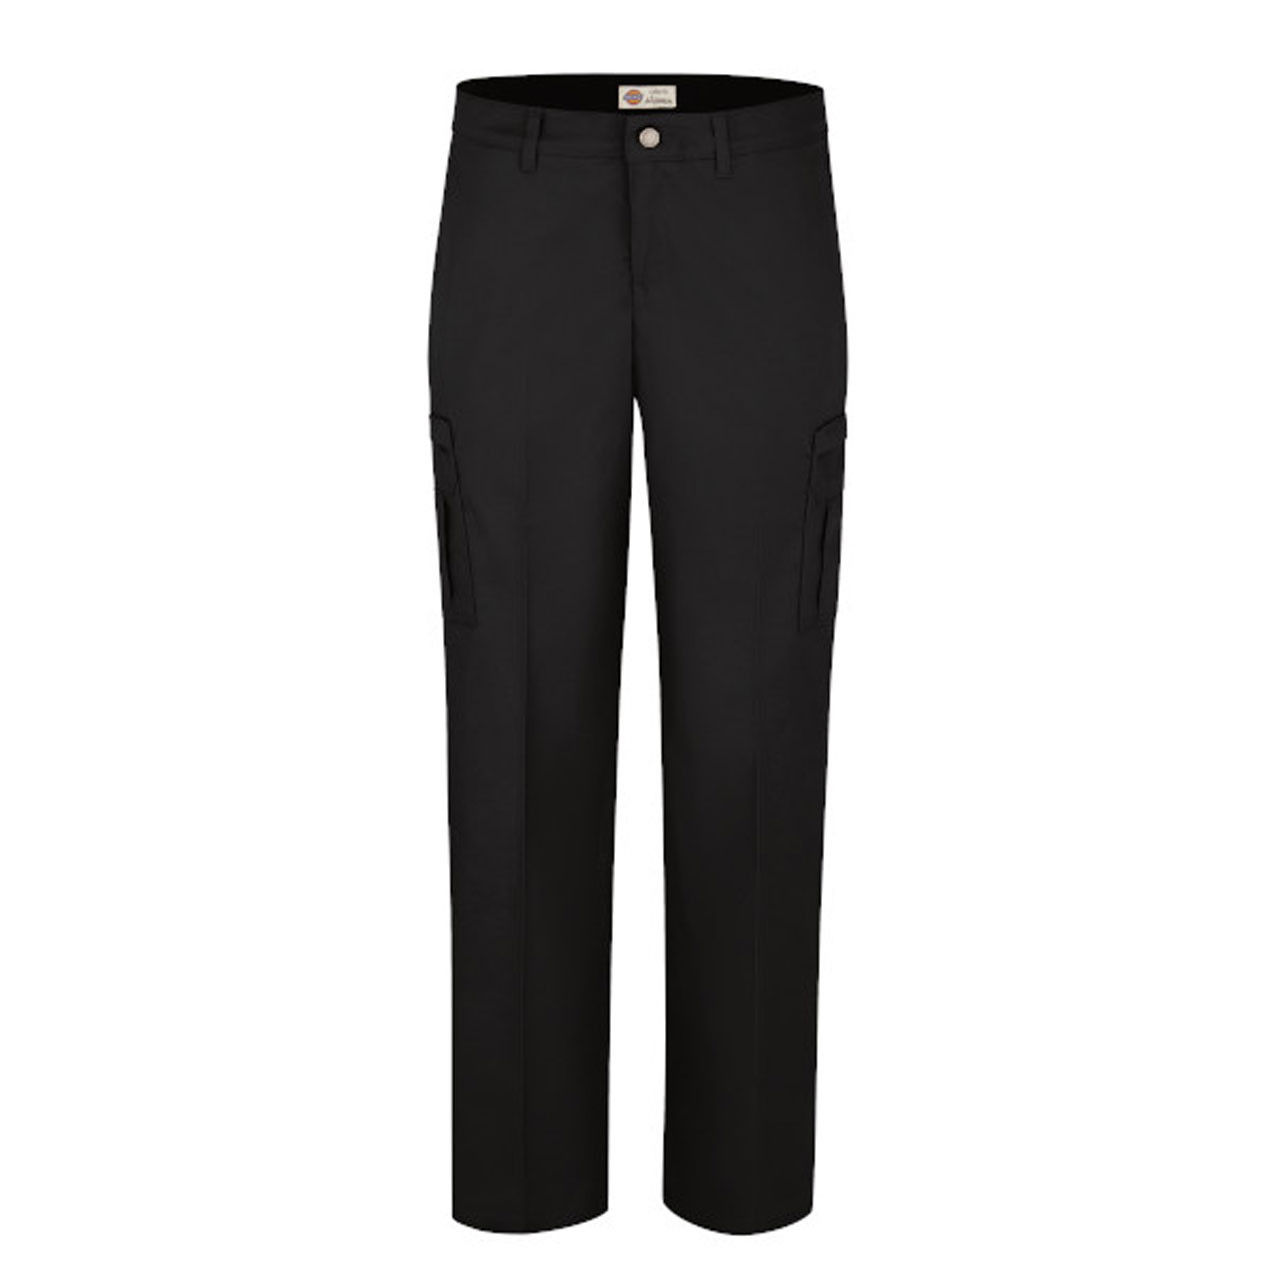 What's the fabric composition of black dickies pants womens?